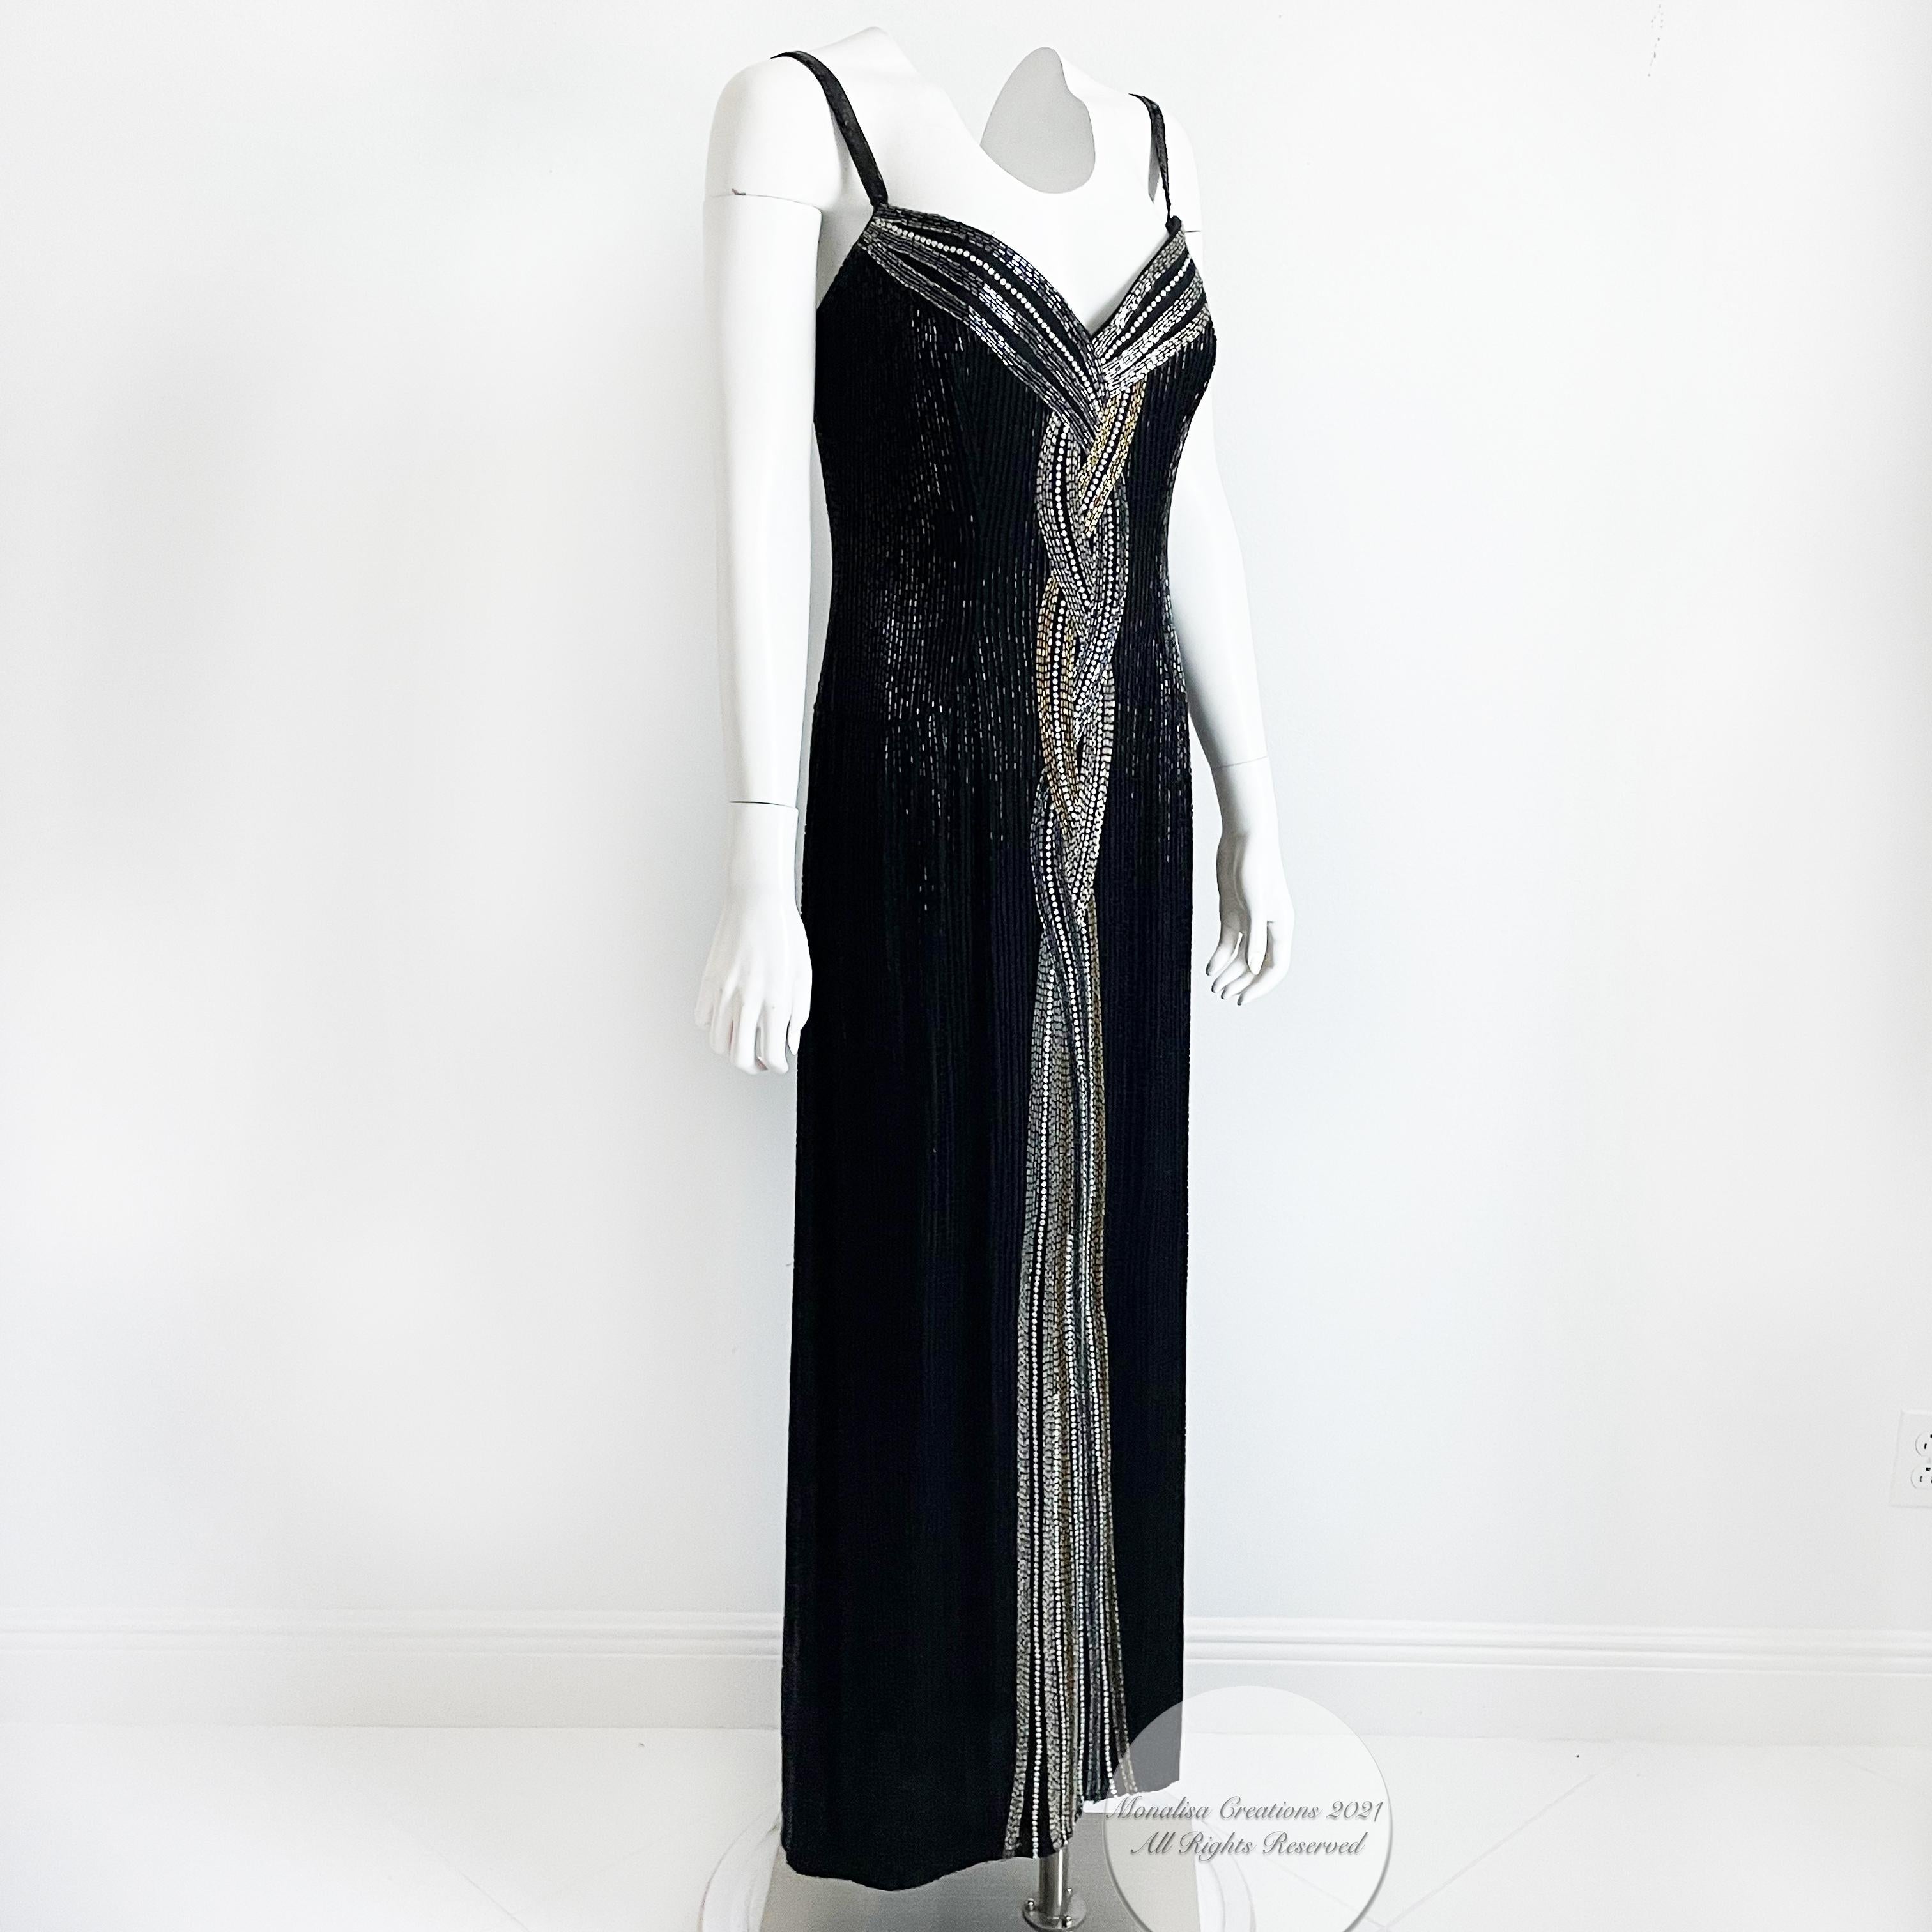 This fabulous evening gown was made by Bob Mackie in 1982, around the time he opened his ready-to-wear boutique. Made from black silk, it's covered in tons of black jet beads and features a braid of silver and gold beads and white rhinestones at the